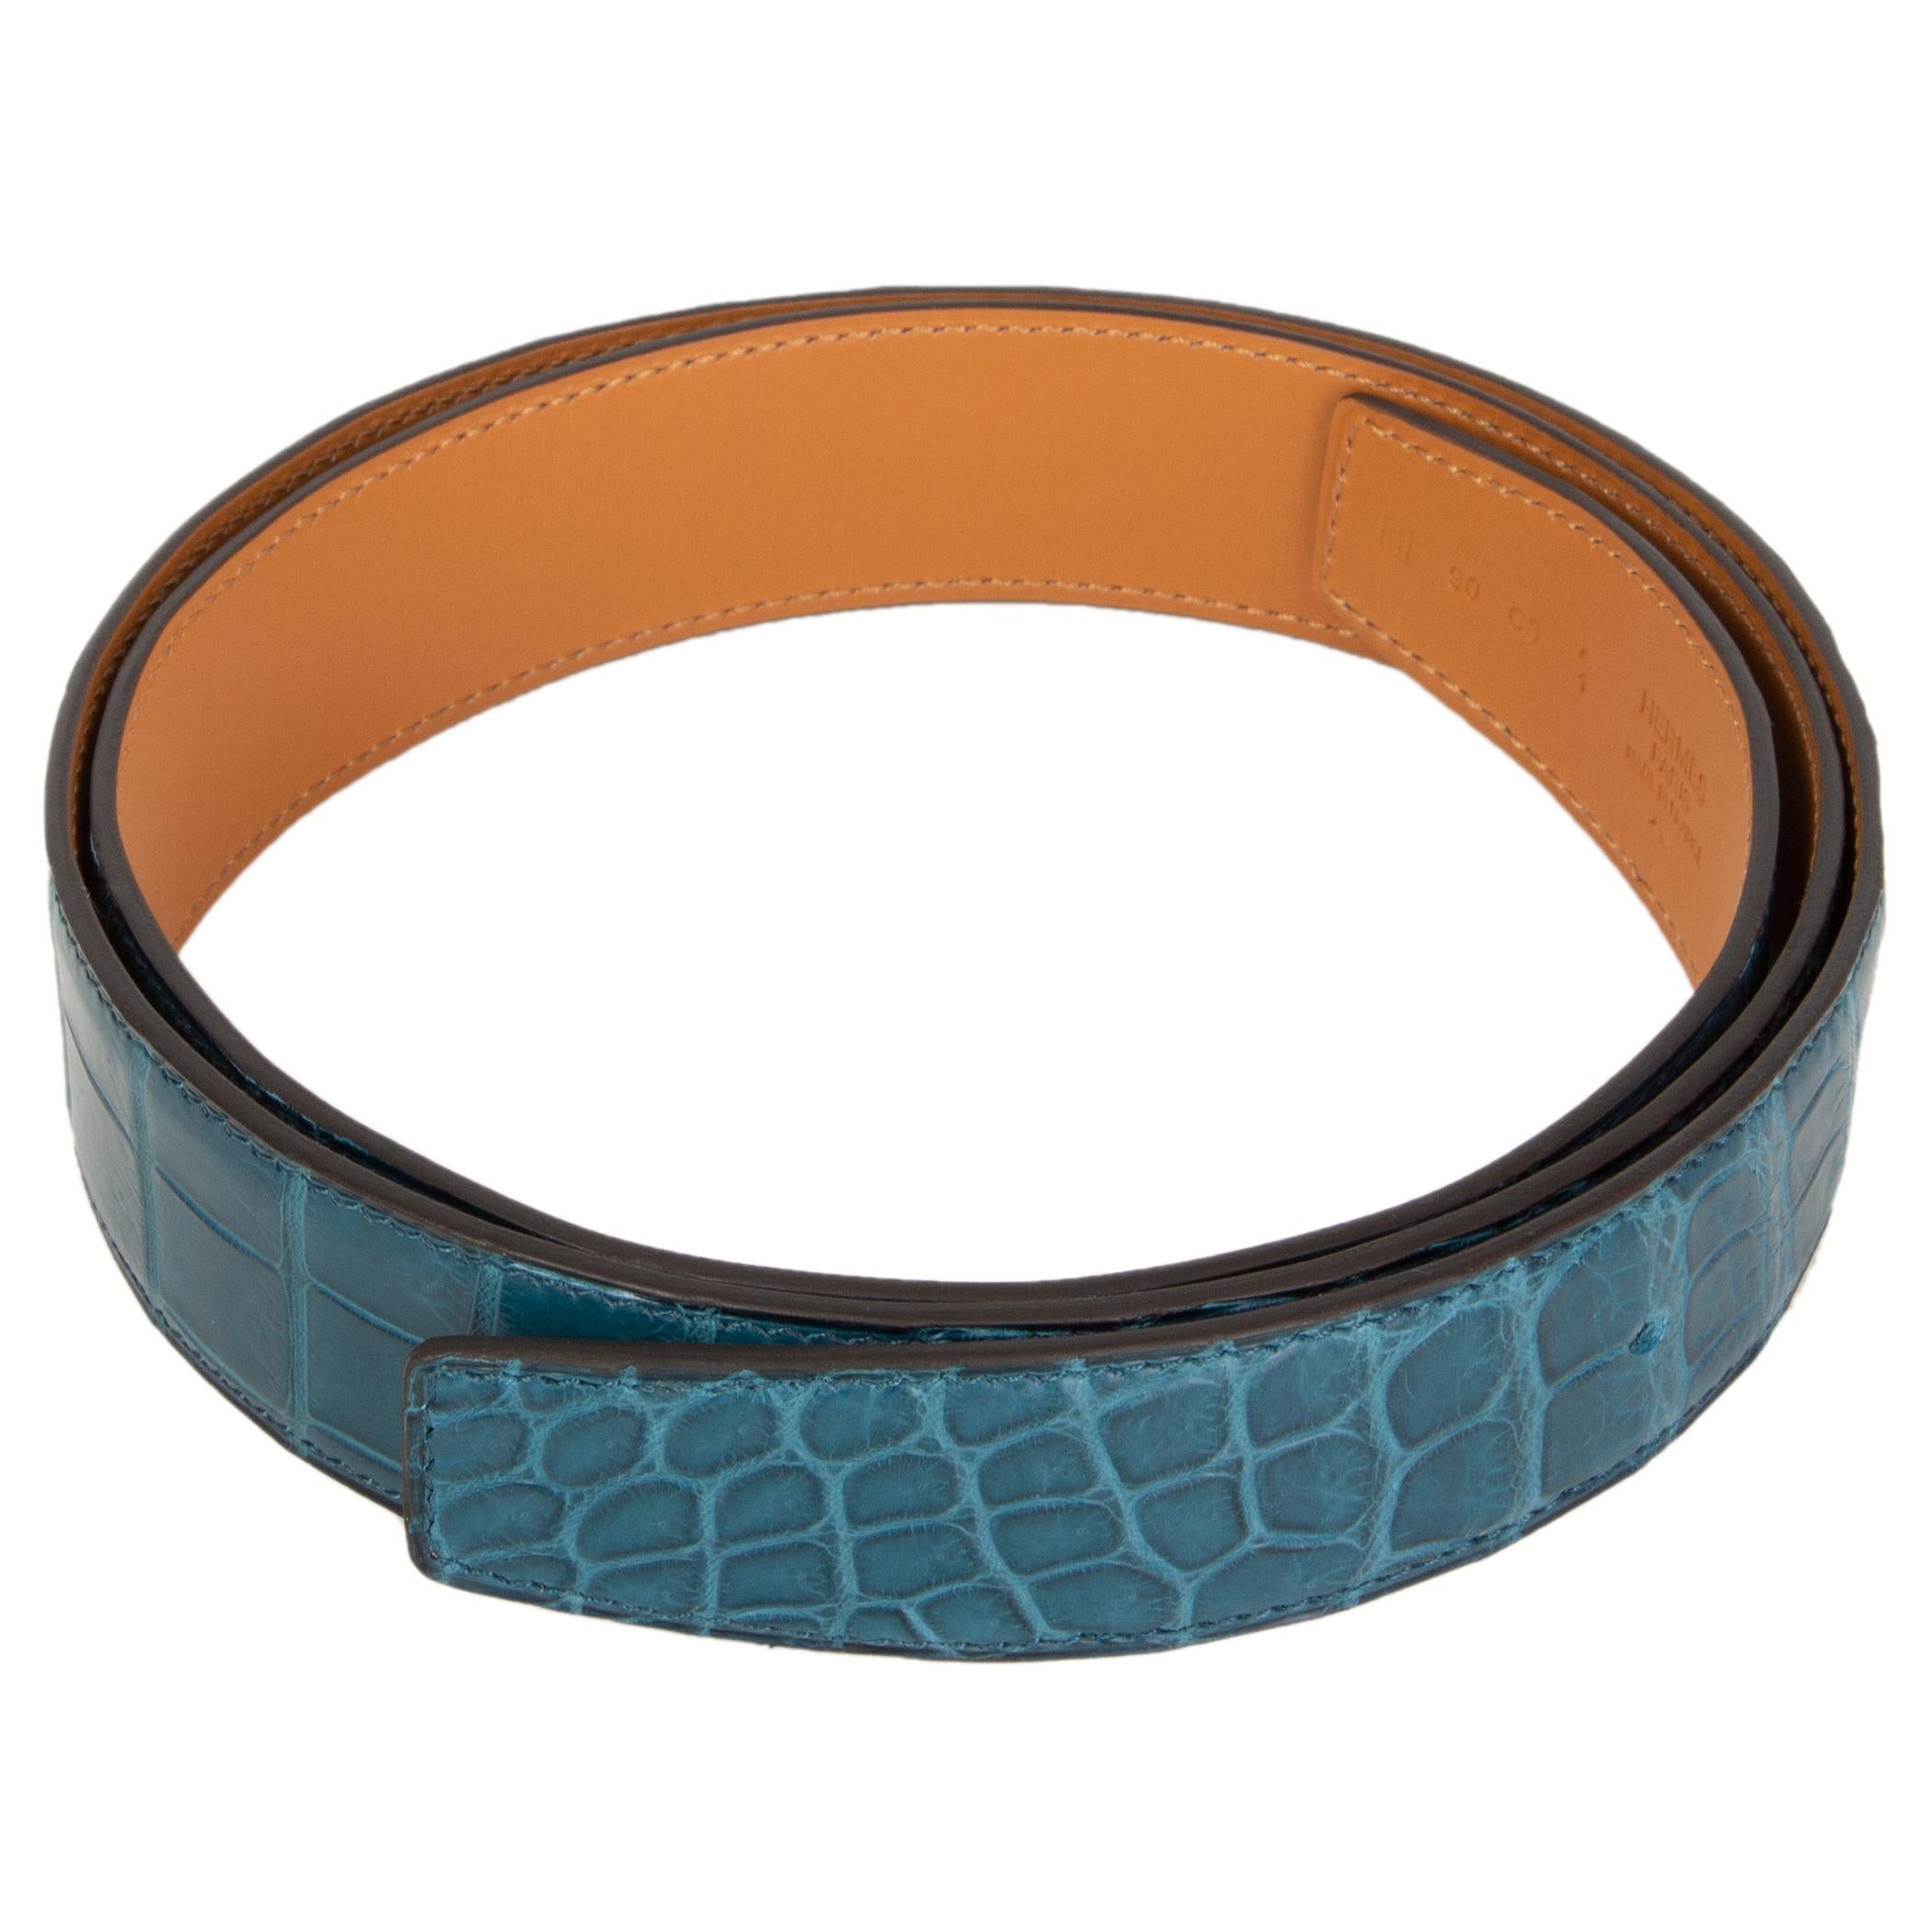 Hermes 32mm belt strap in Bleu Colvert (petrol) matte porosus crocodile. Brand new. Comes with box. 

Measurements
Tag Size	90
Width	3.2cm (1.2in)
Fits	88cm (34.3in) to 92cm (35.9in)
